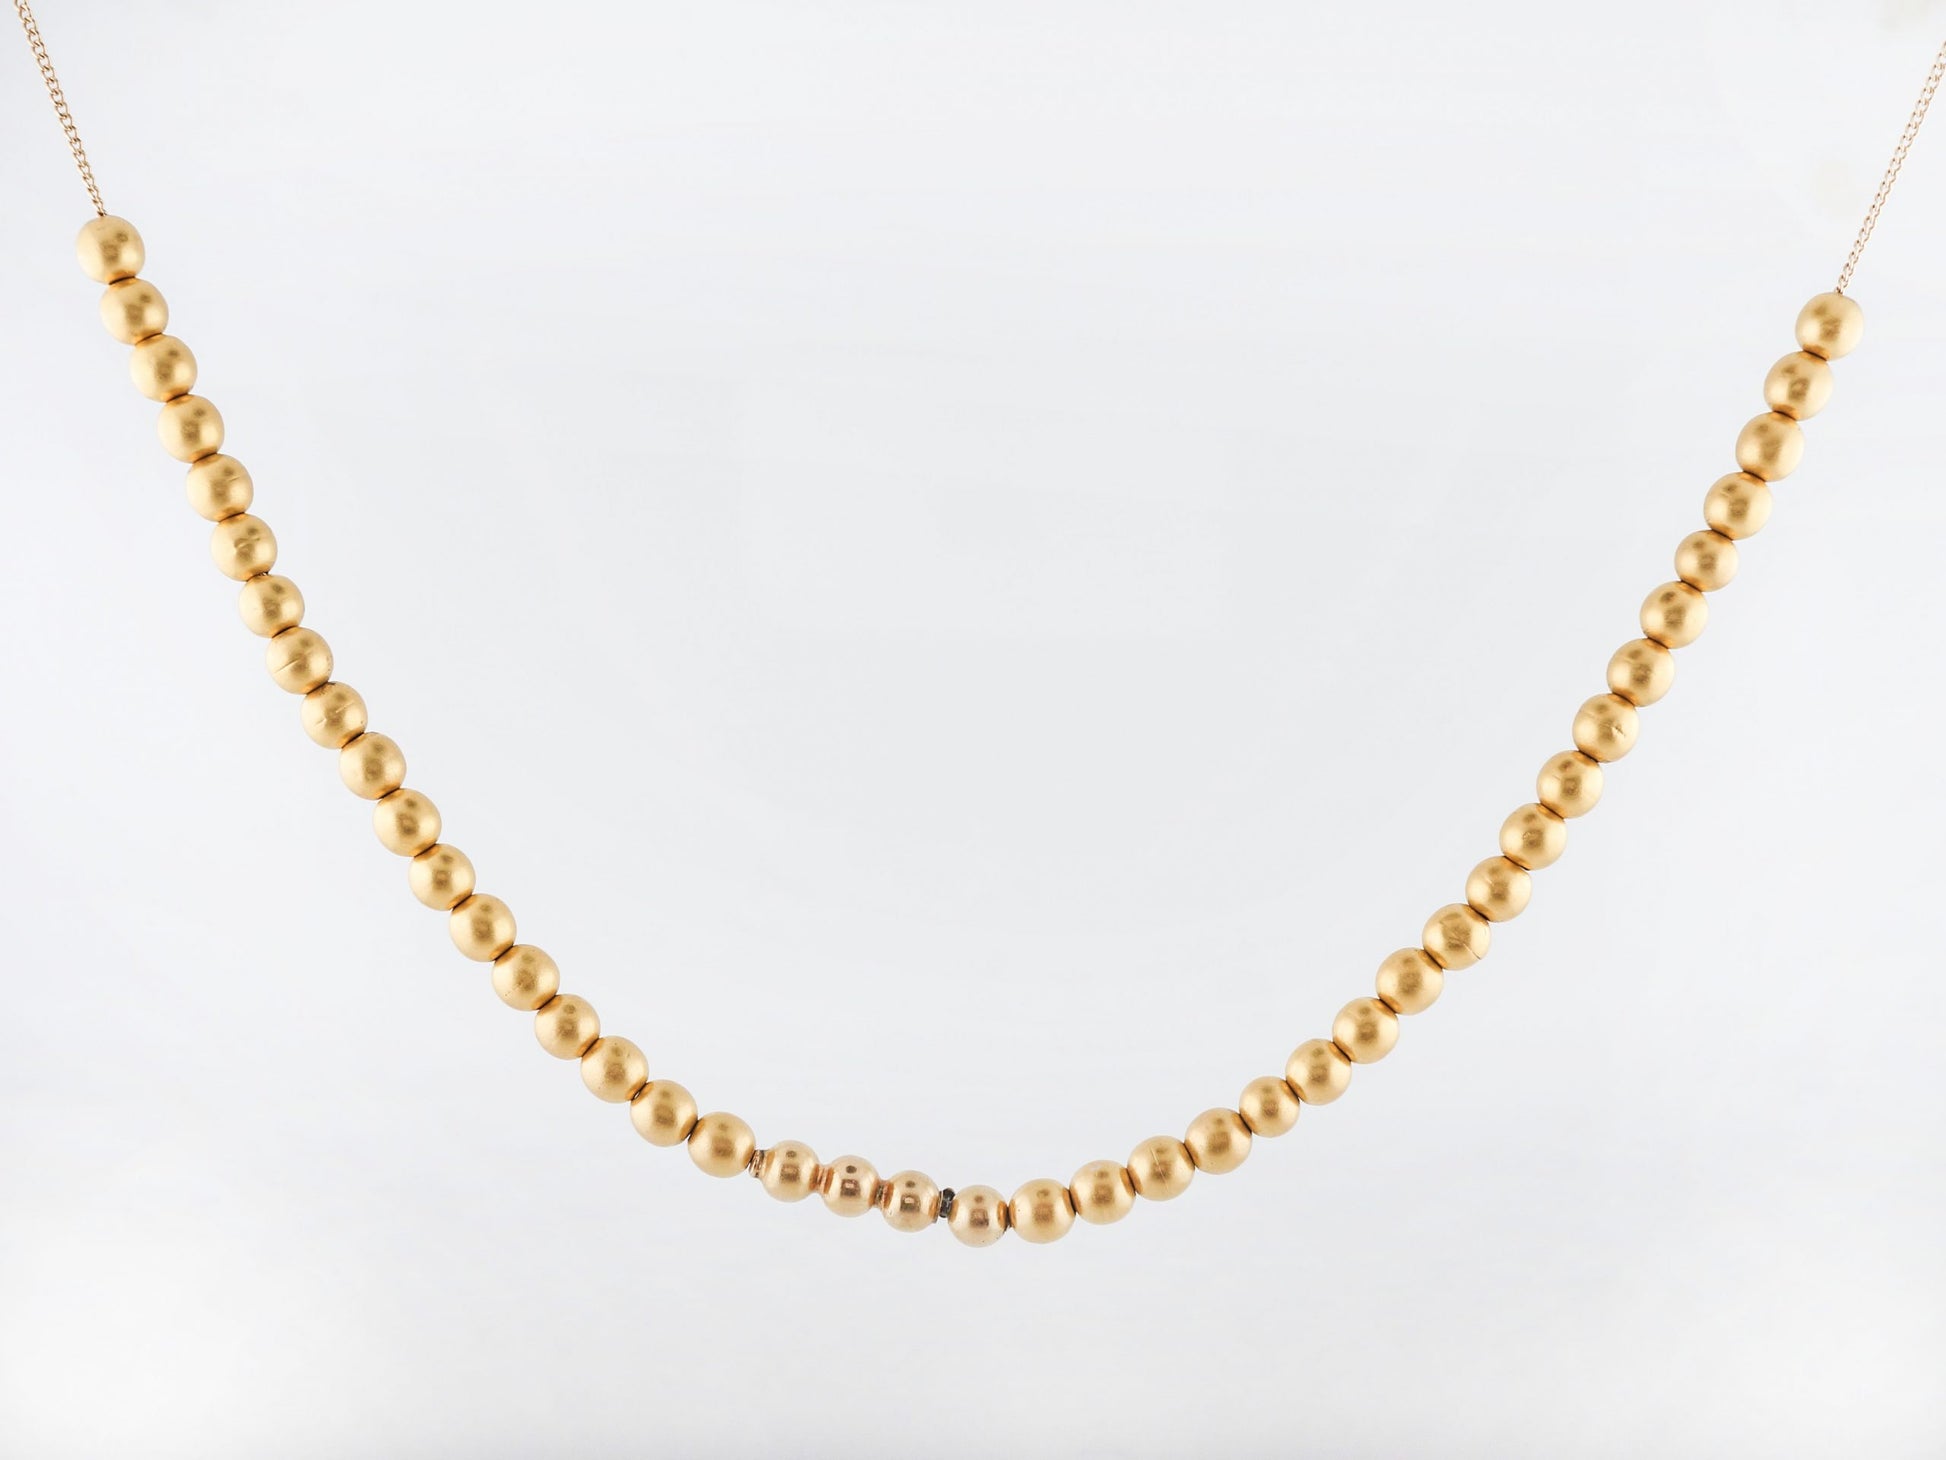 Antique Art Deco Beaded Necklace in 18k Yellow Gold